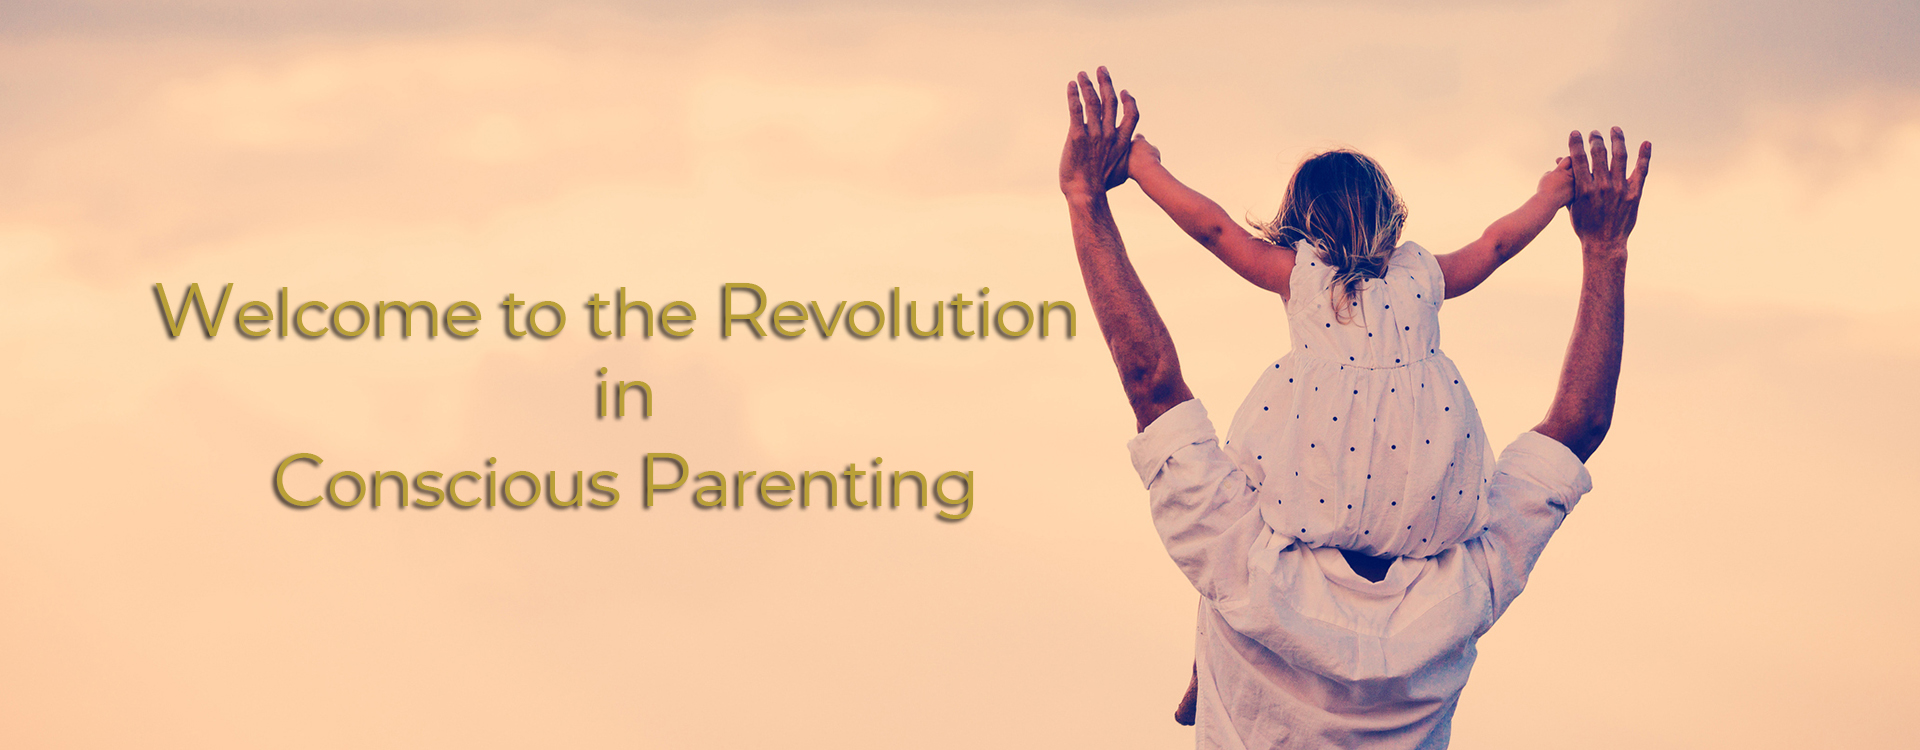 Welcome to the revolution in conscious parenting